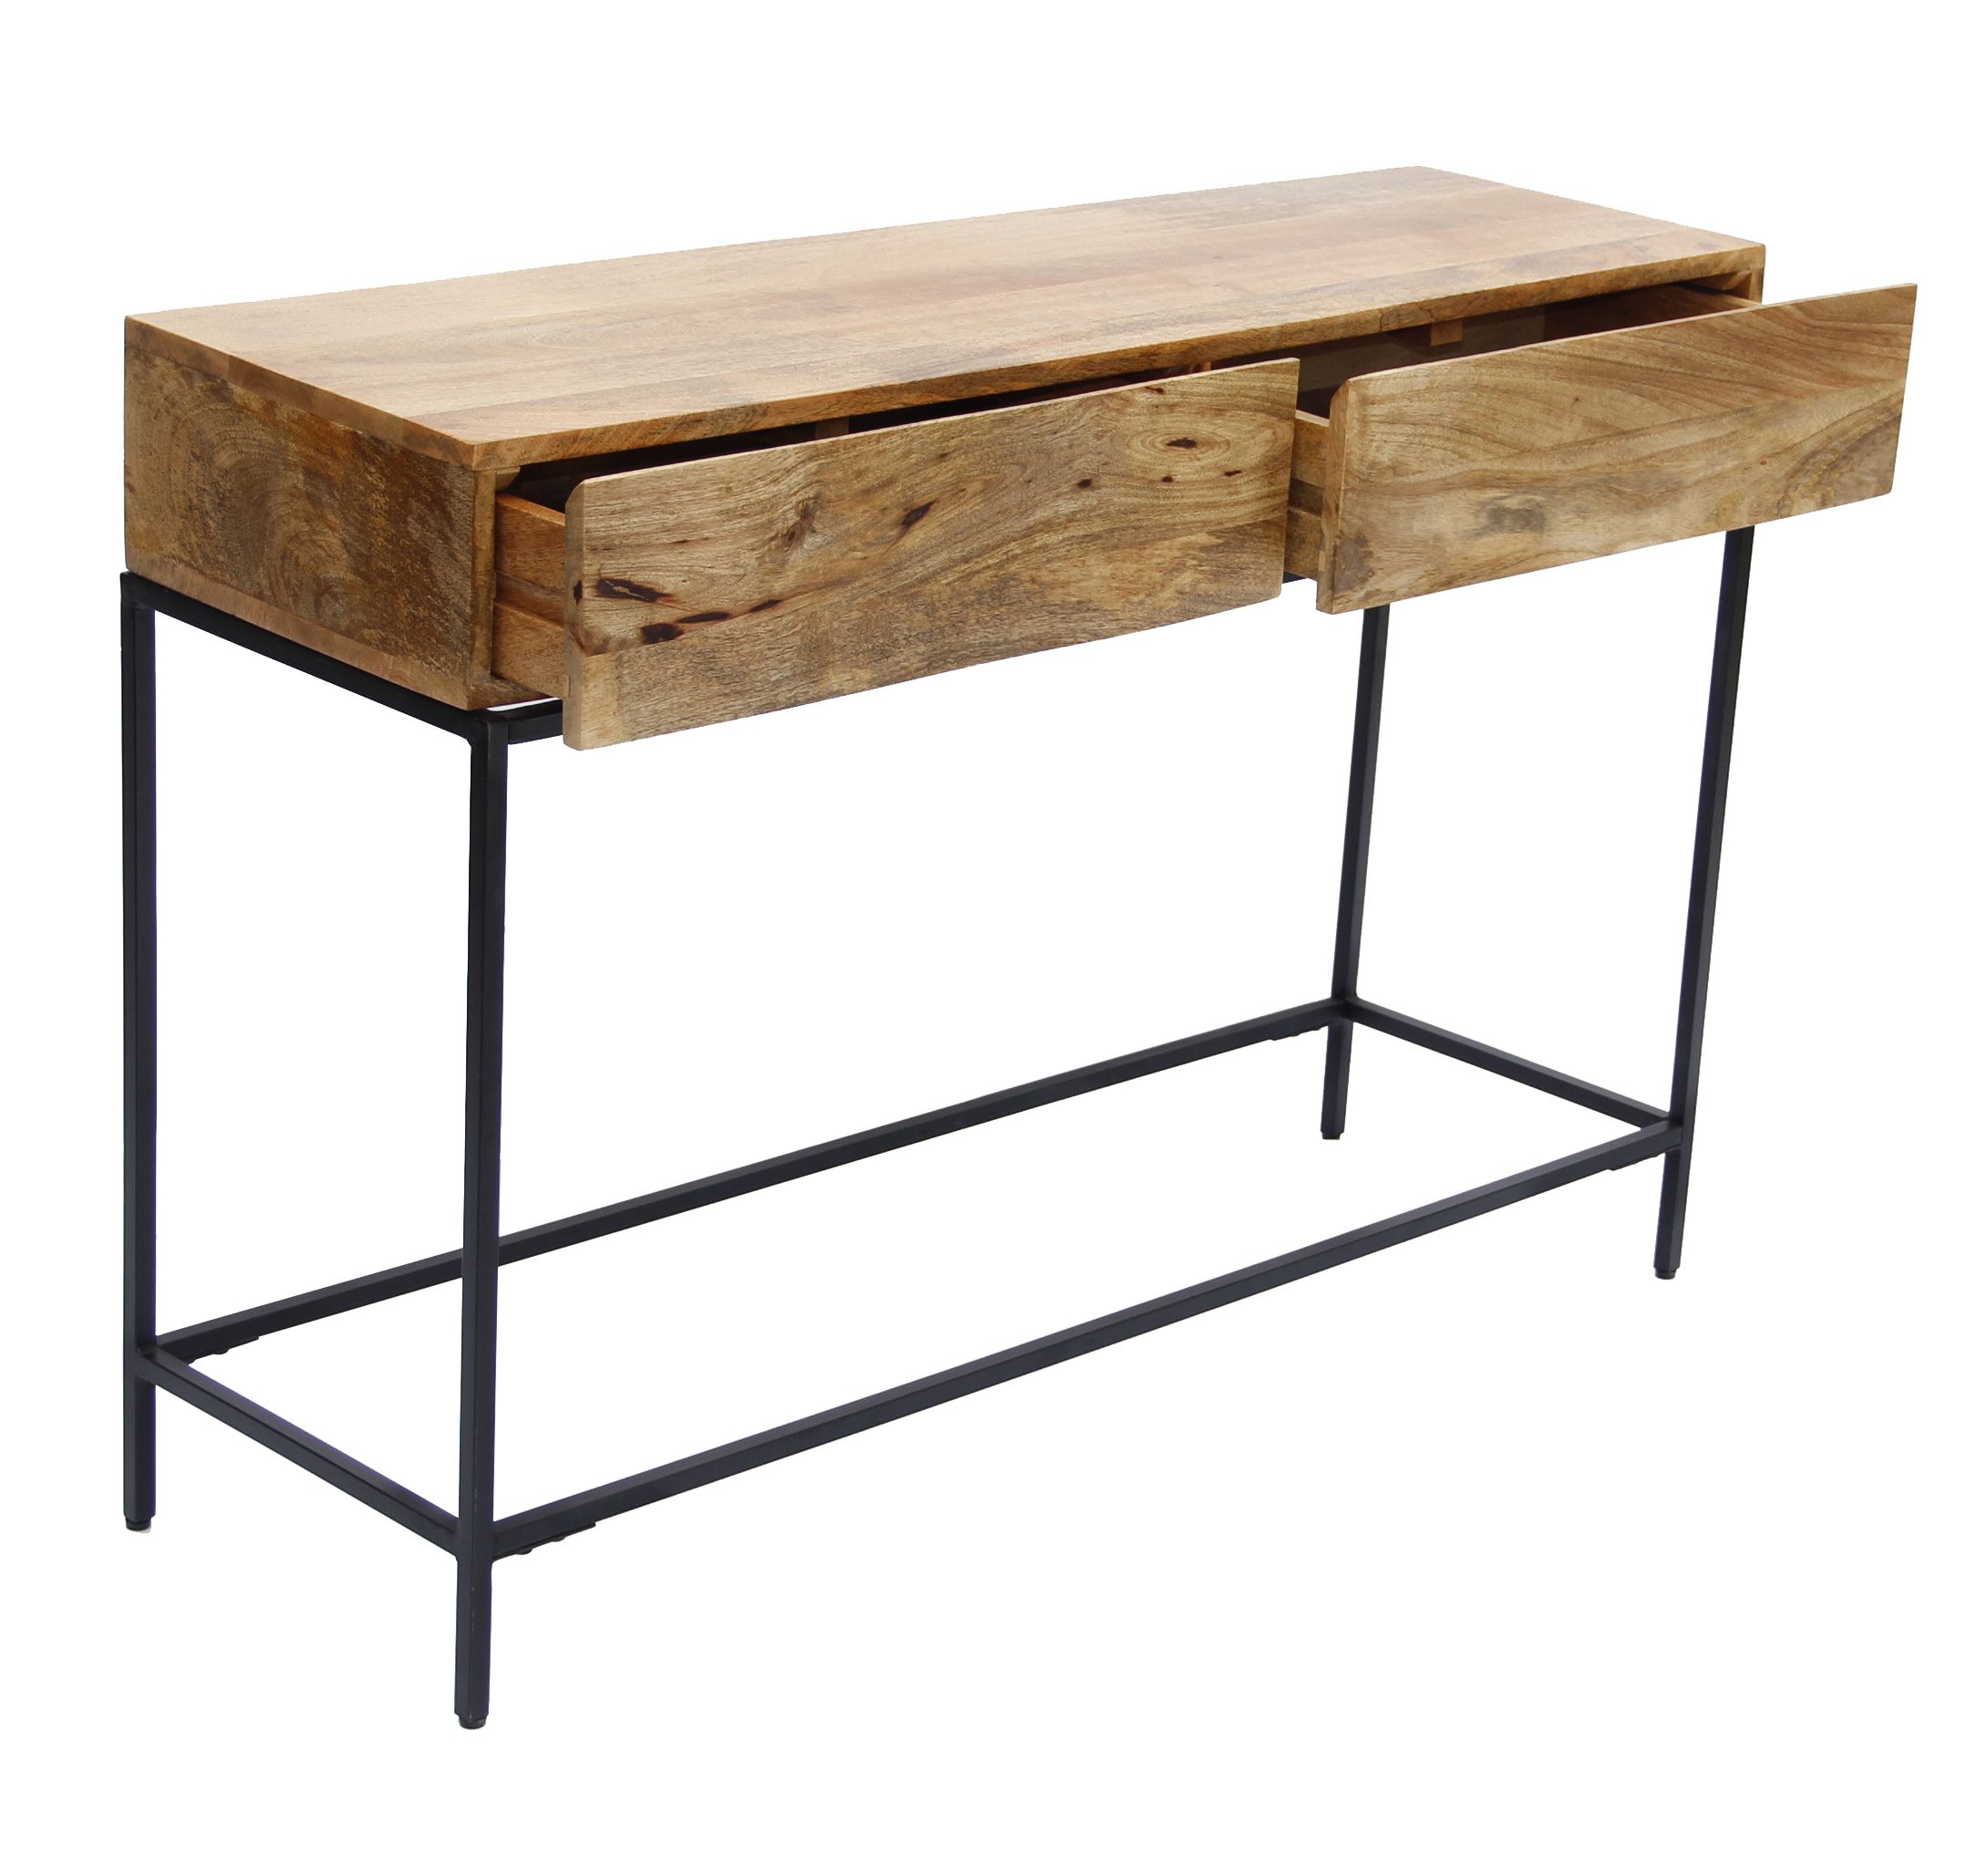 Mango Wood And Metal Console Table With Two Drawers, Brown Pertaining To Natural Mango Wood Console Tables (View 1 of 20)